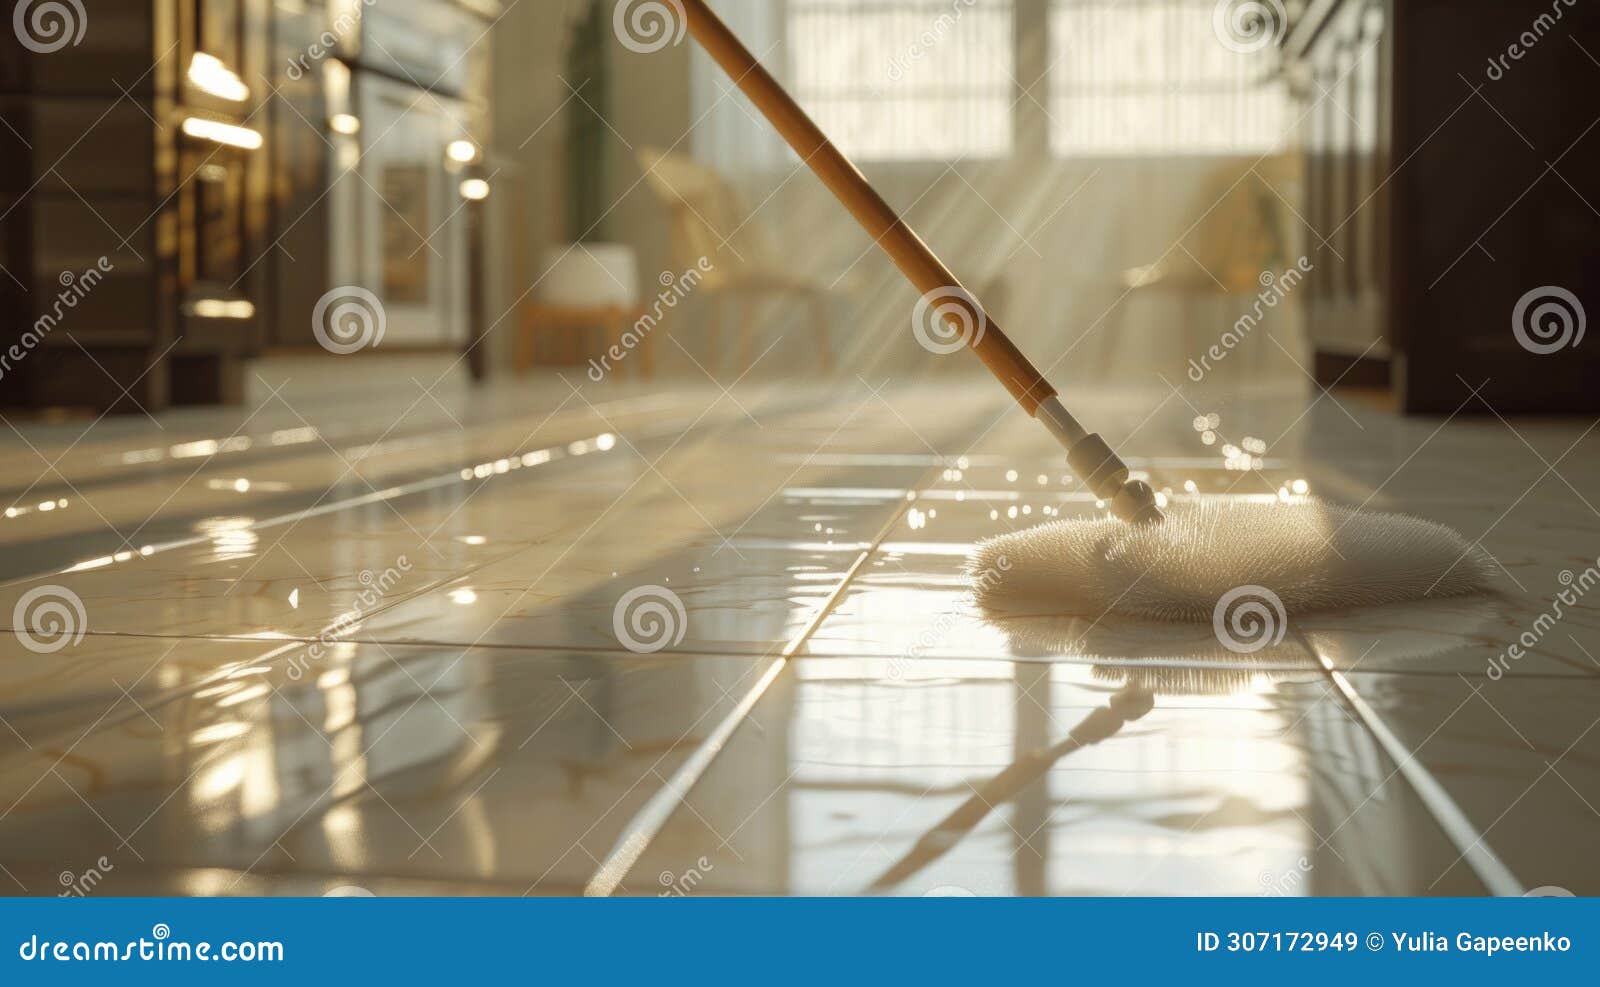 highlight the cleanliness of freshly and mopped floors. a mop leaving behind gleaming tiles